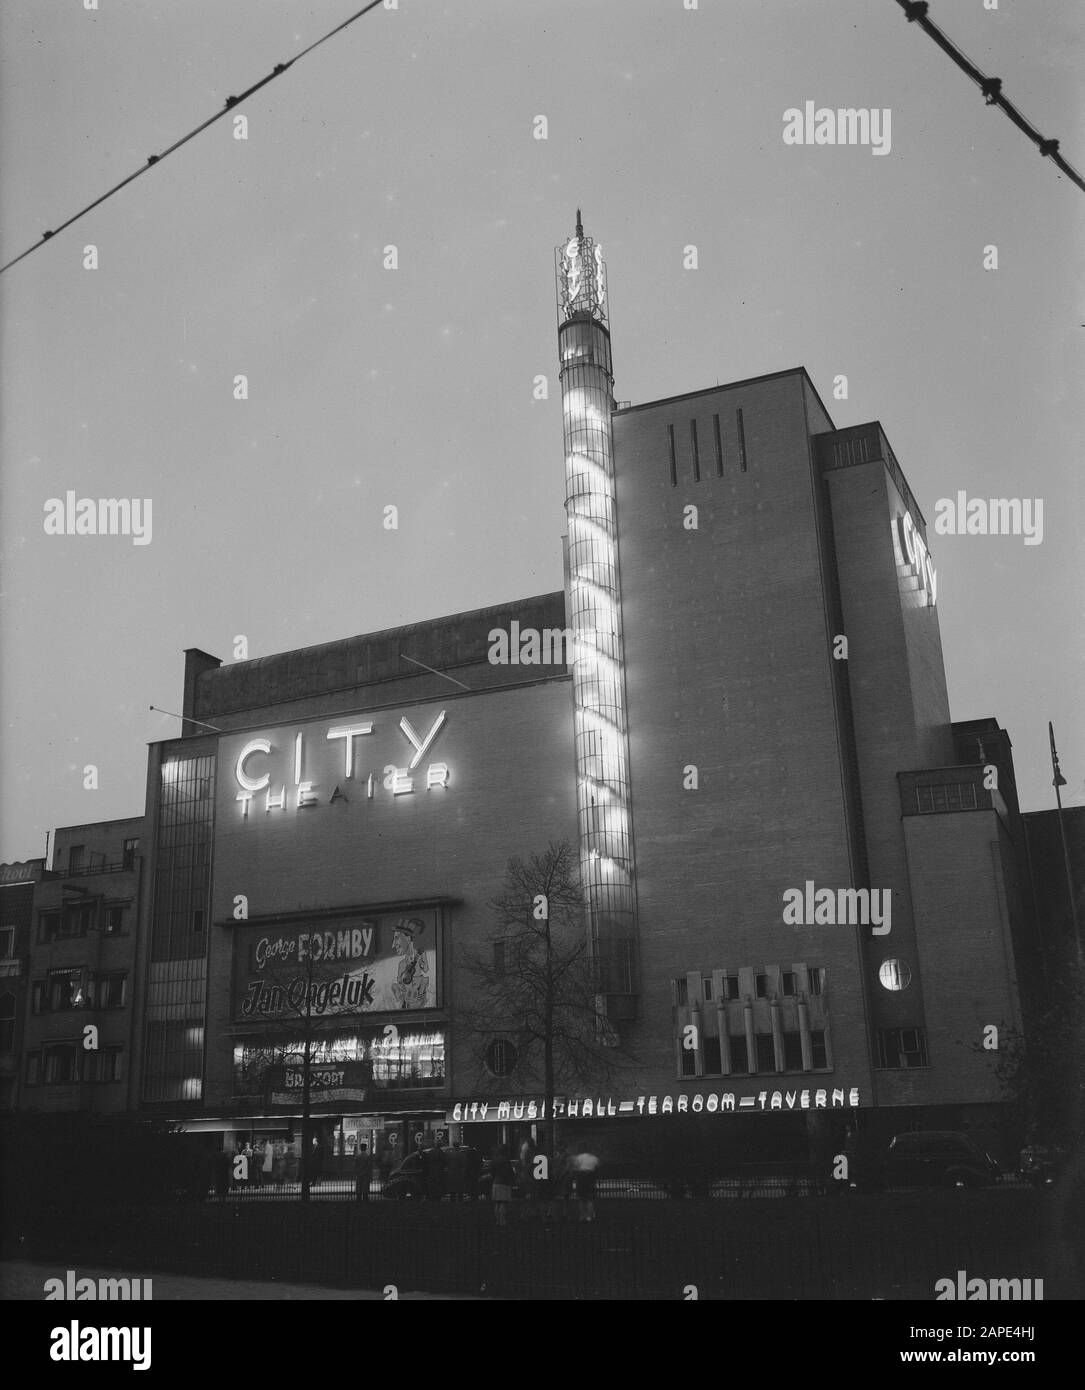 City Theater Date: 14 April 1946 Person name: City Theater Stock Photo